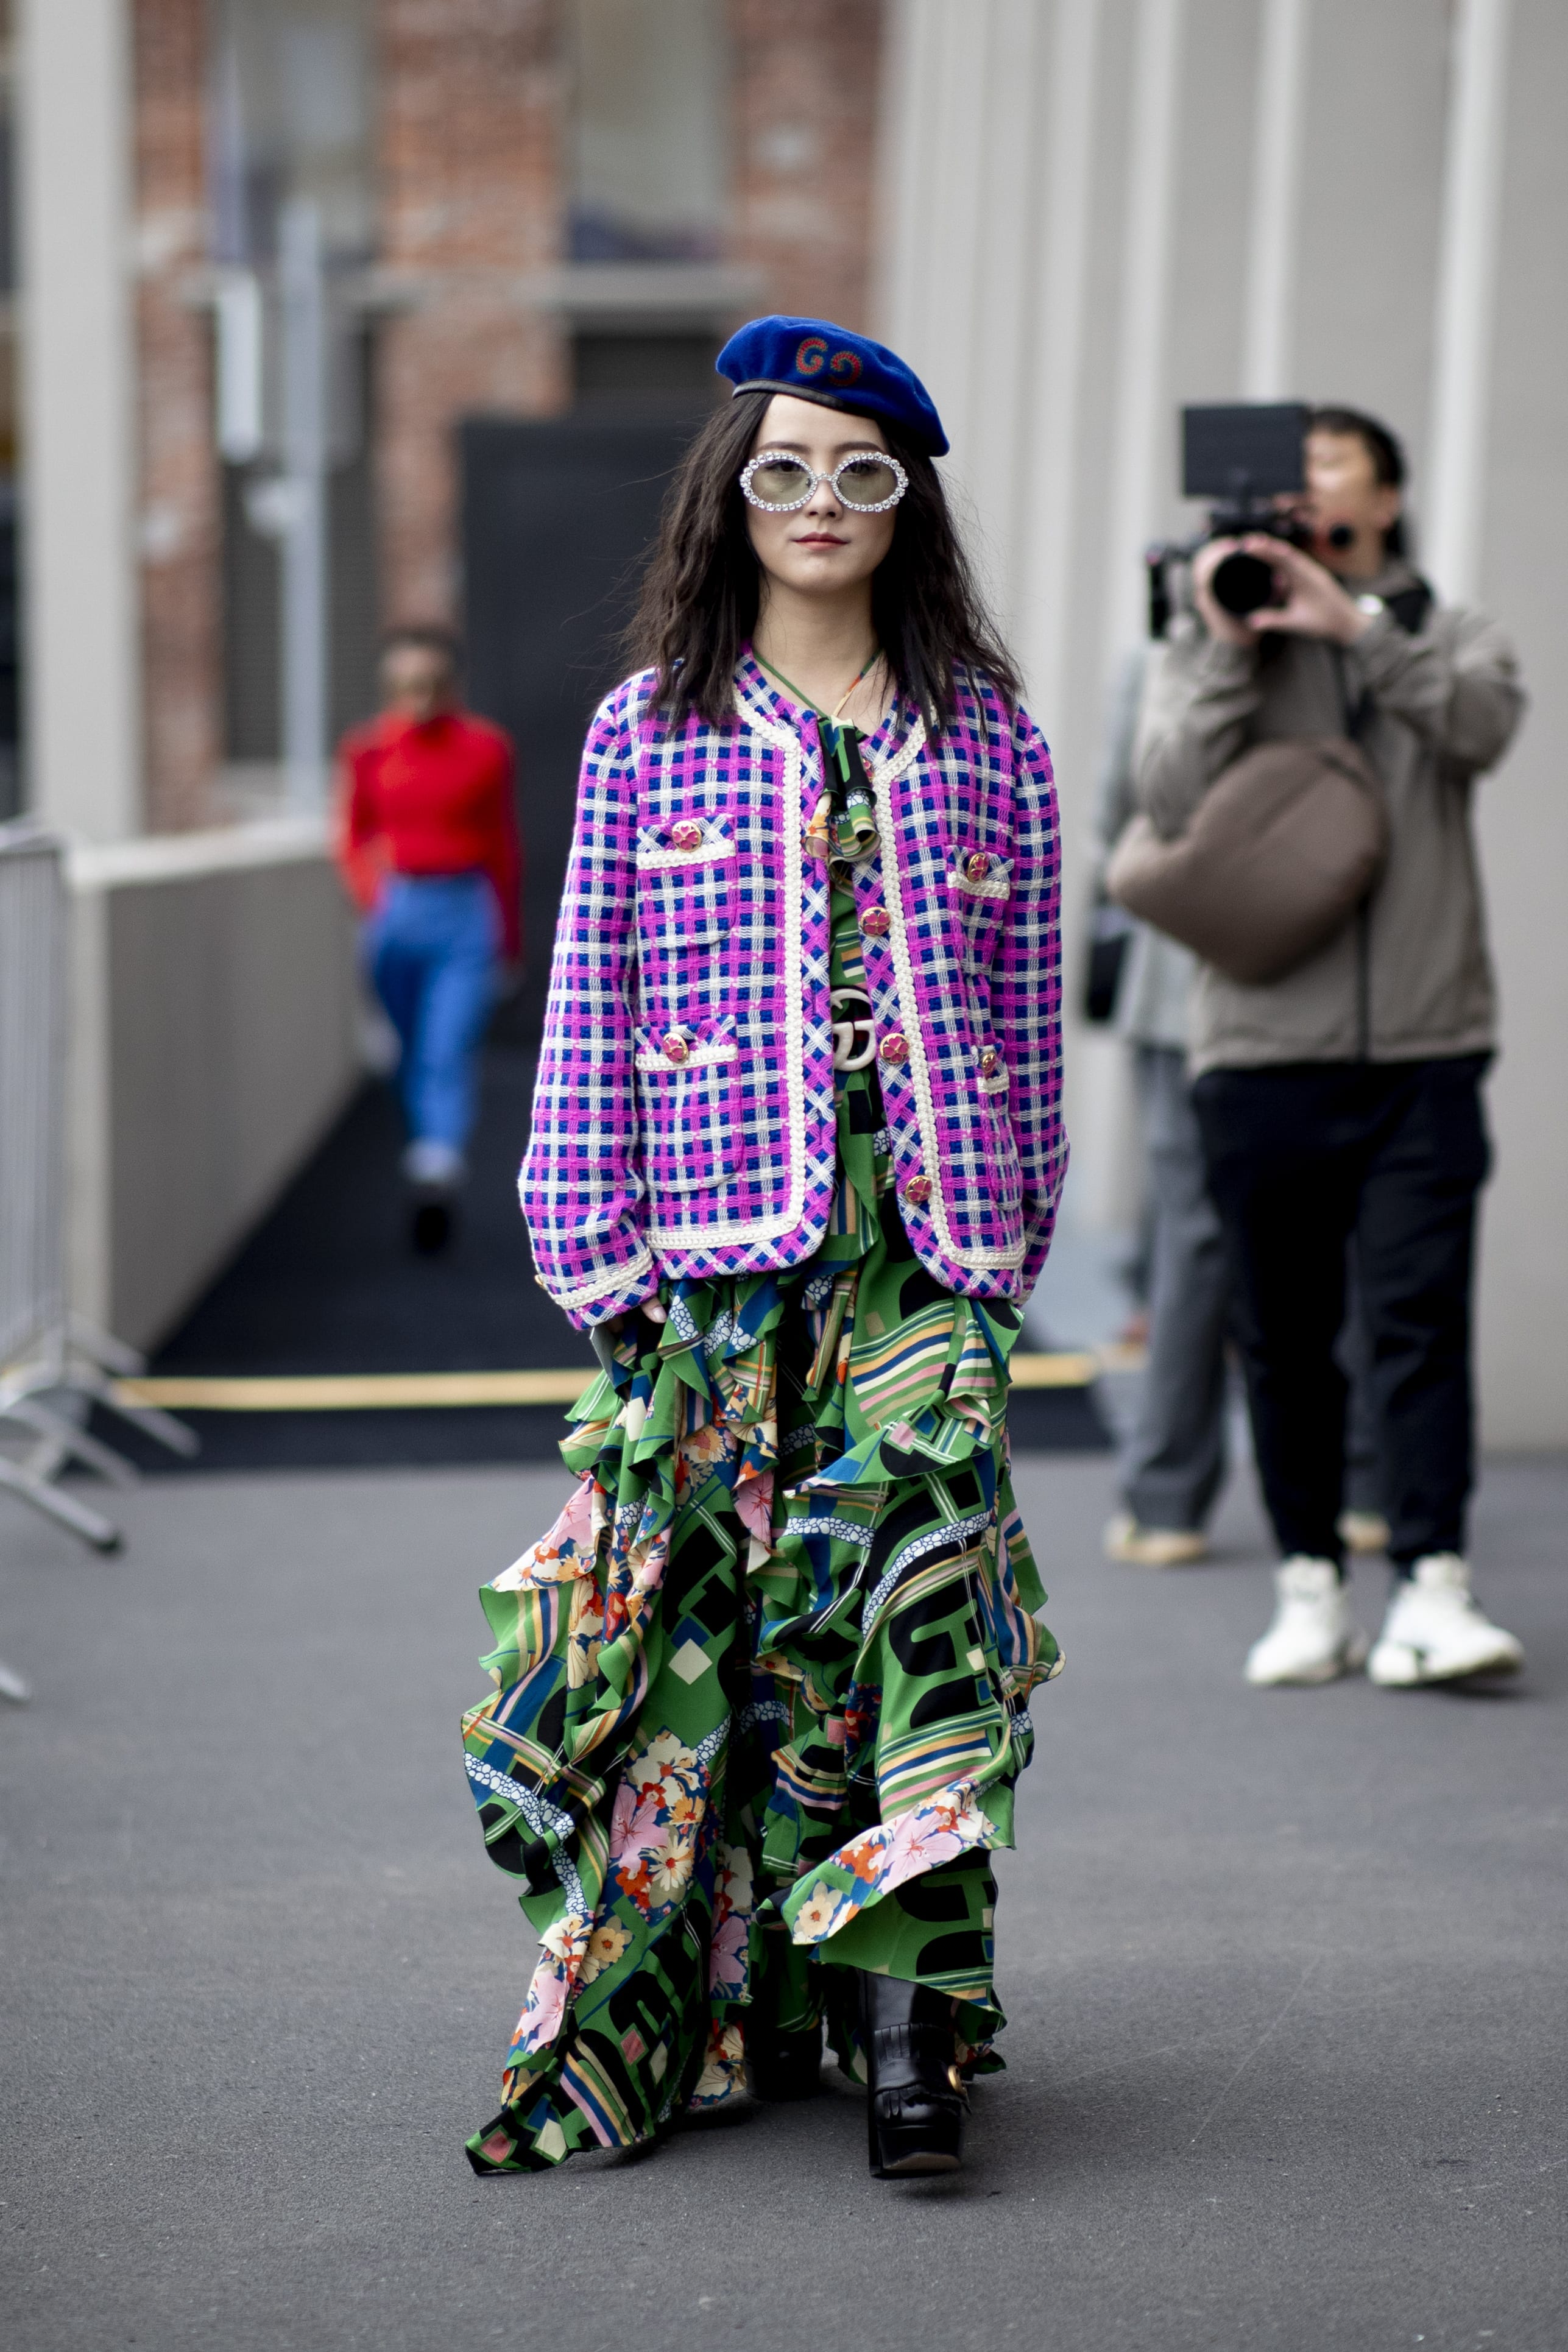 The Best Street Style Looks from Milan Fashion Week - FASHION Magazine